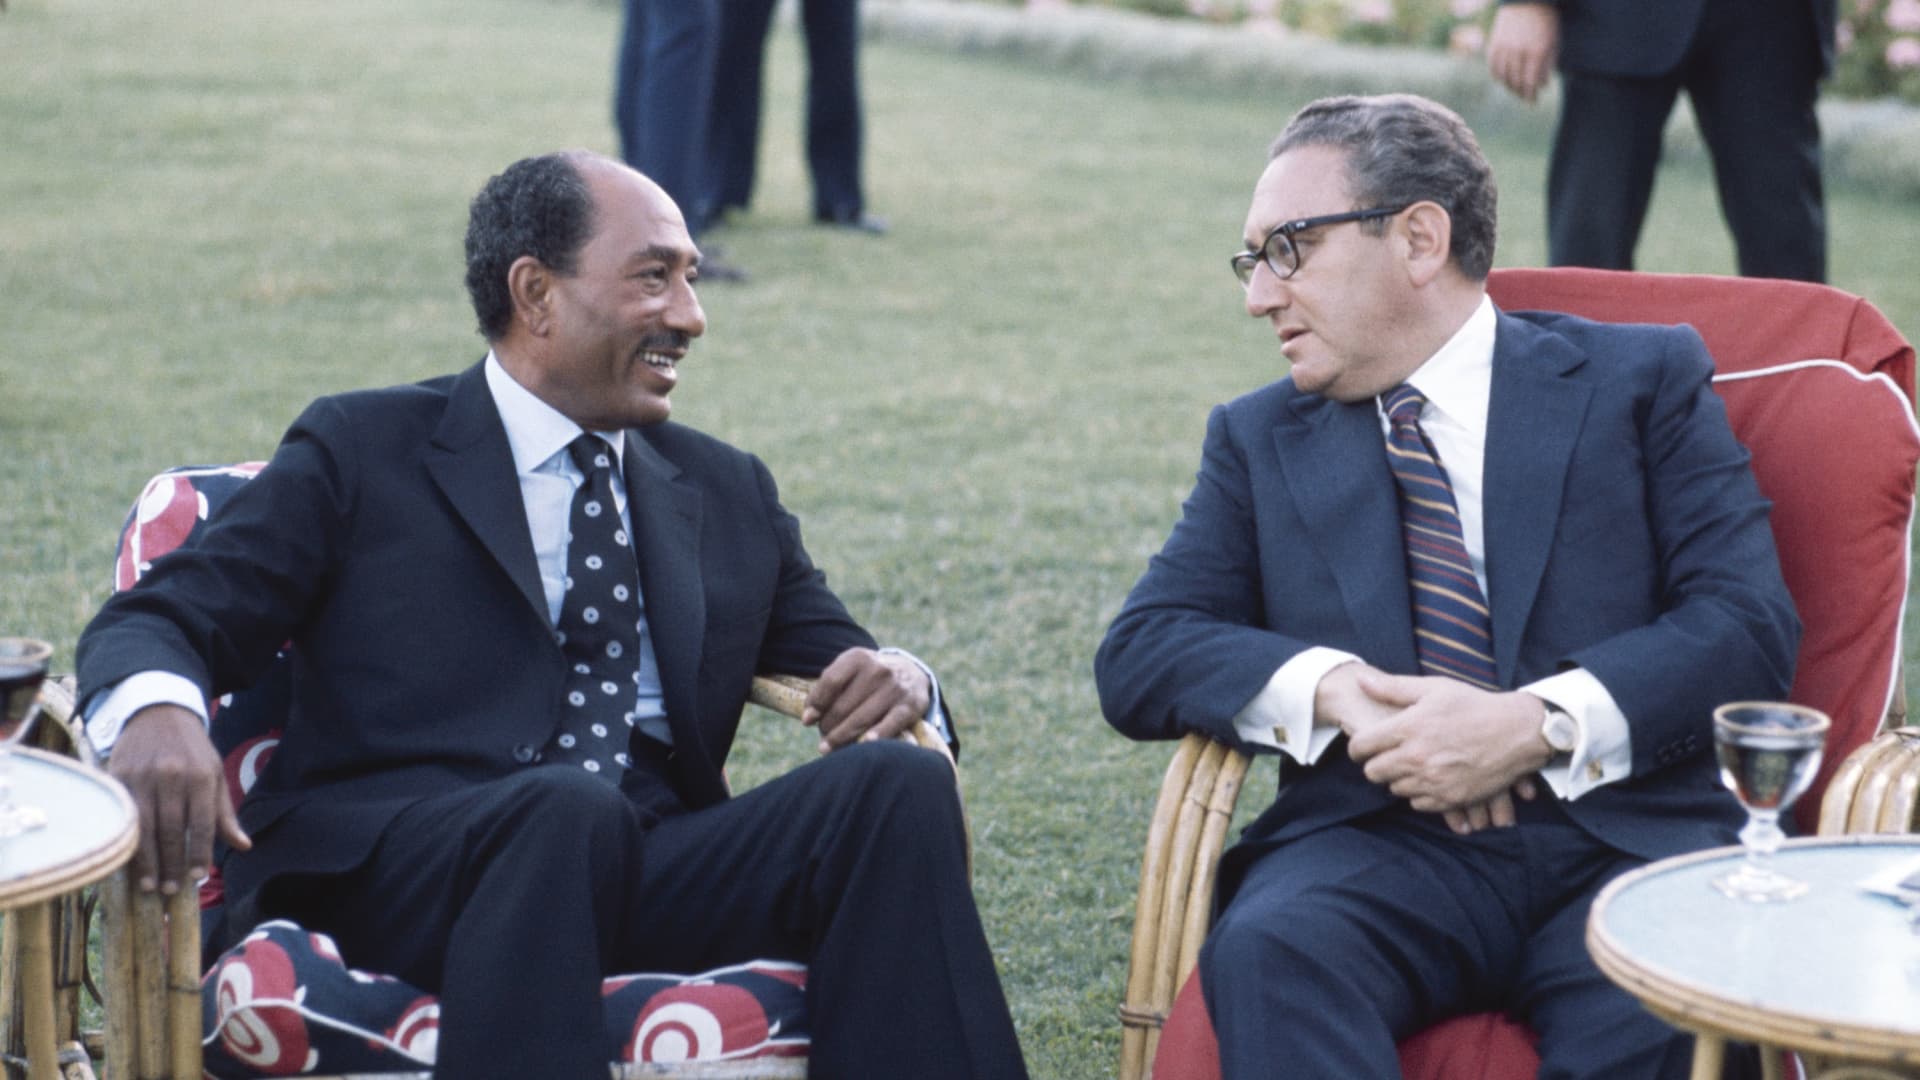 Egyptian President Anwar Sadat and U.S. Secretary of State Henry Kissinger (R) talk during the Sinai II negotiations, which resulted in land being returned to Egypt in 1975 in Alexandria, Egypt.